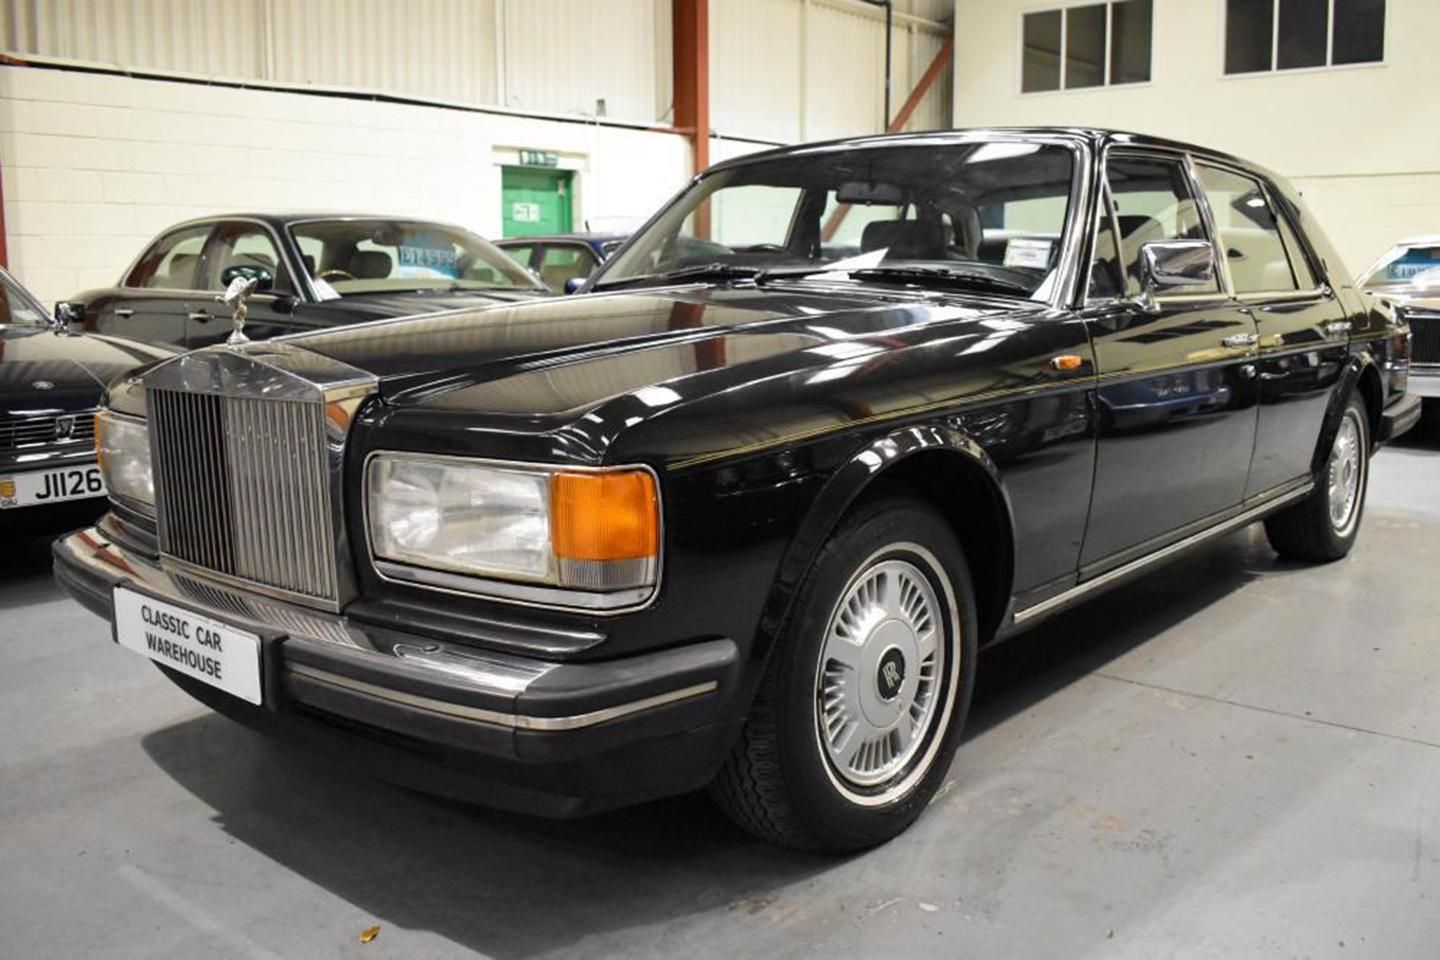 Used RollsRoyce Silver Spirit for sale near me with photos   CarGuruscouk